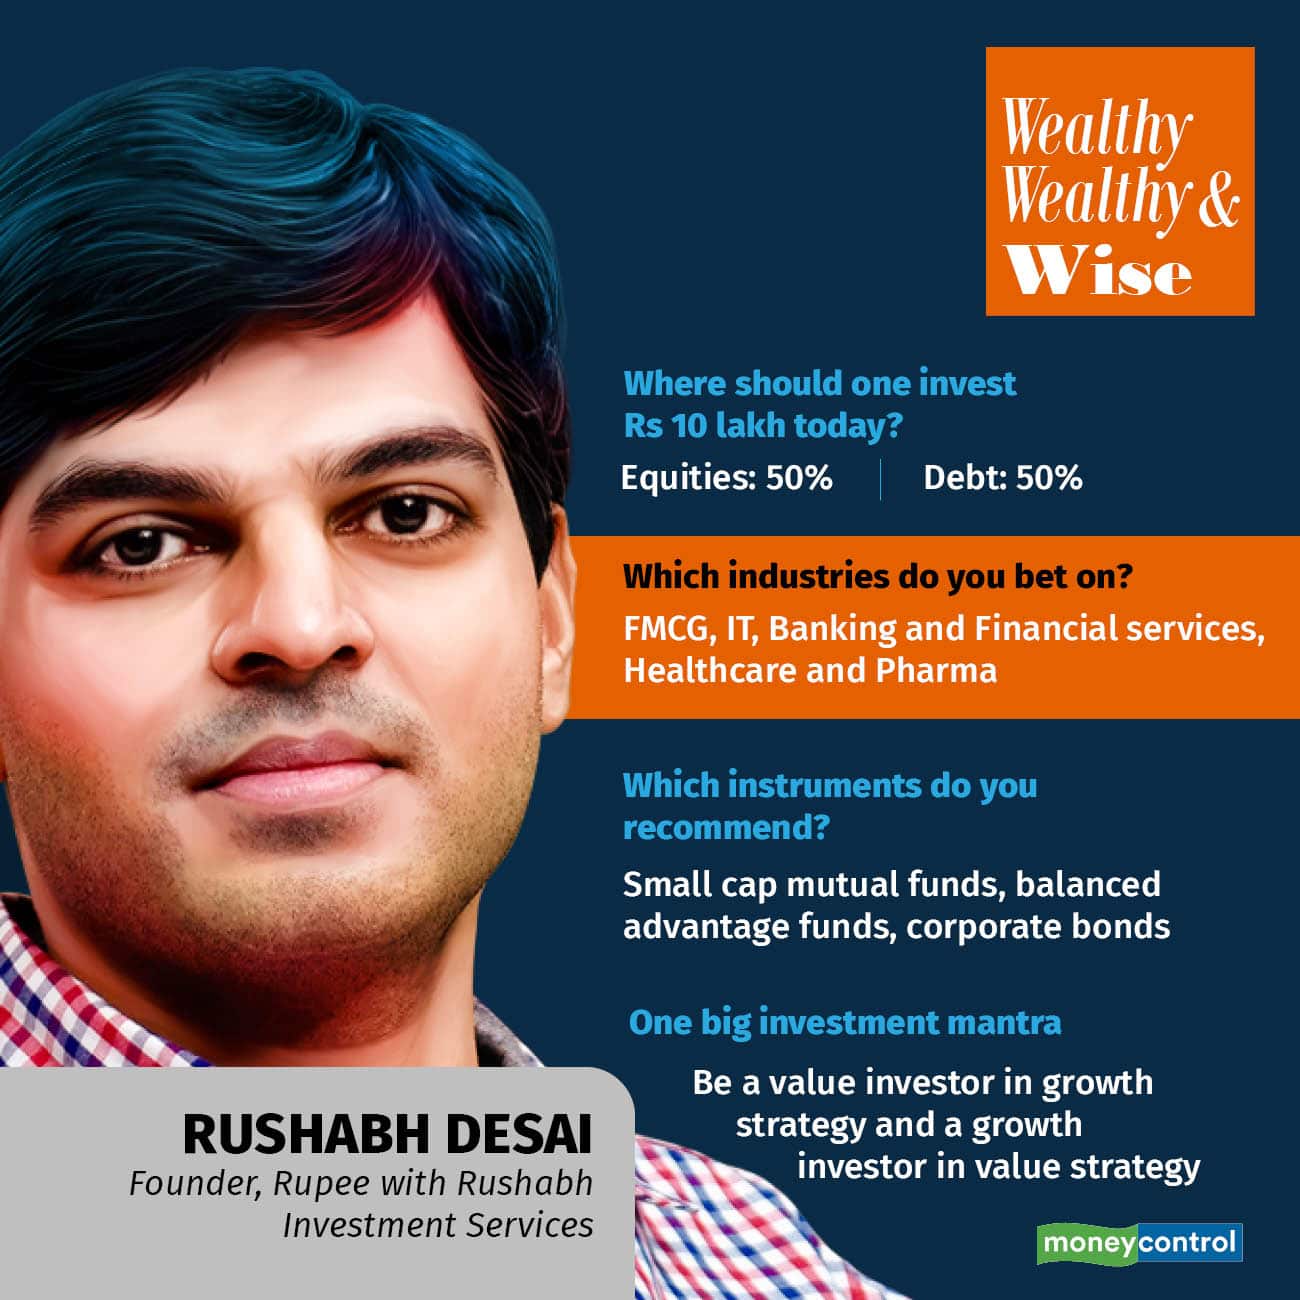 wealthy%20wealthy%20and%20wise%20Rushabh%20Desai